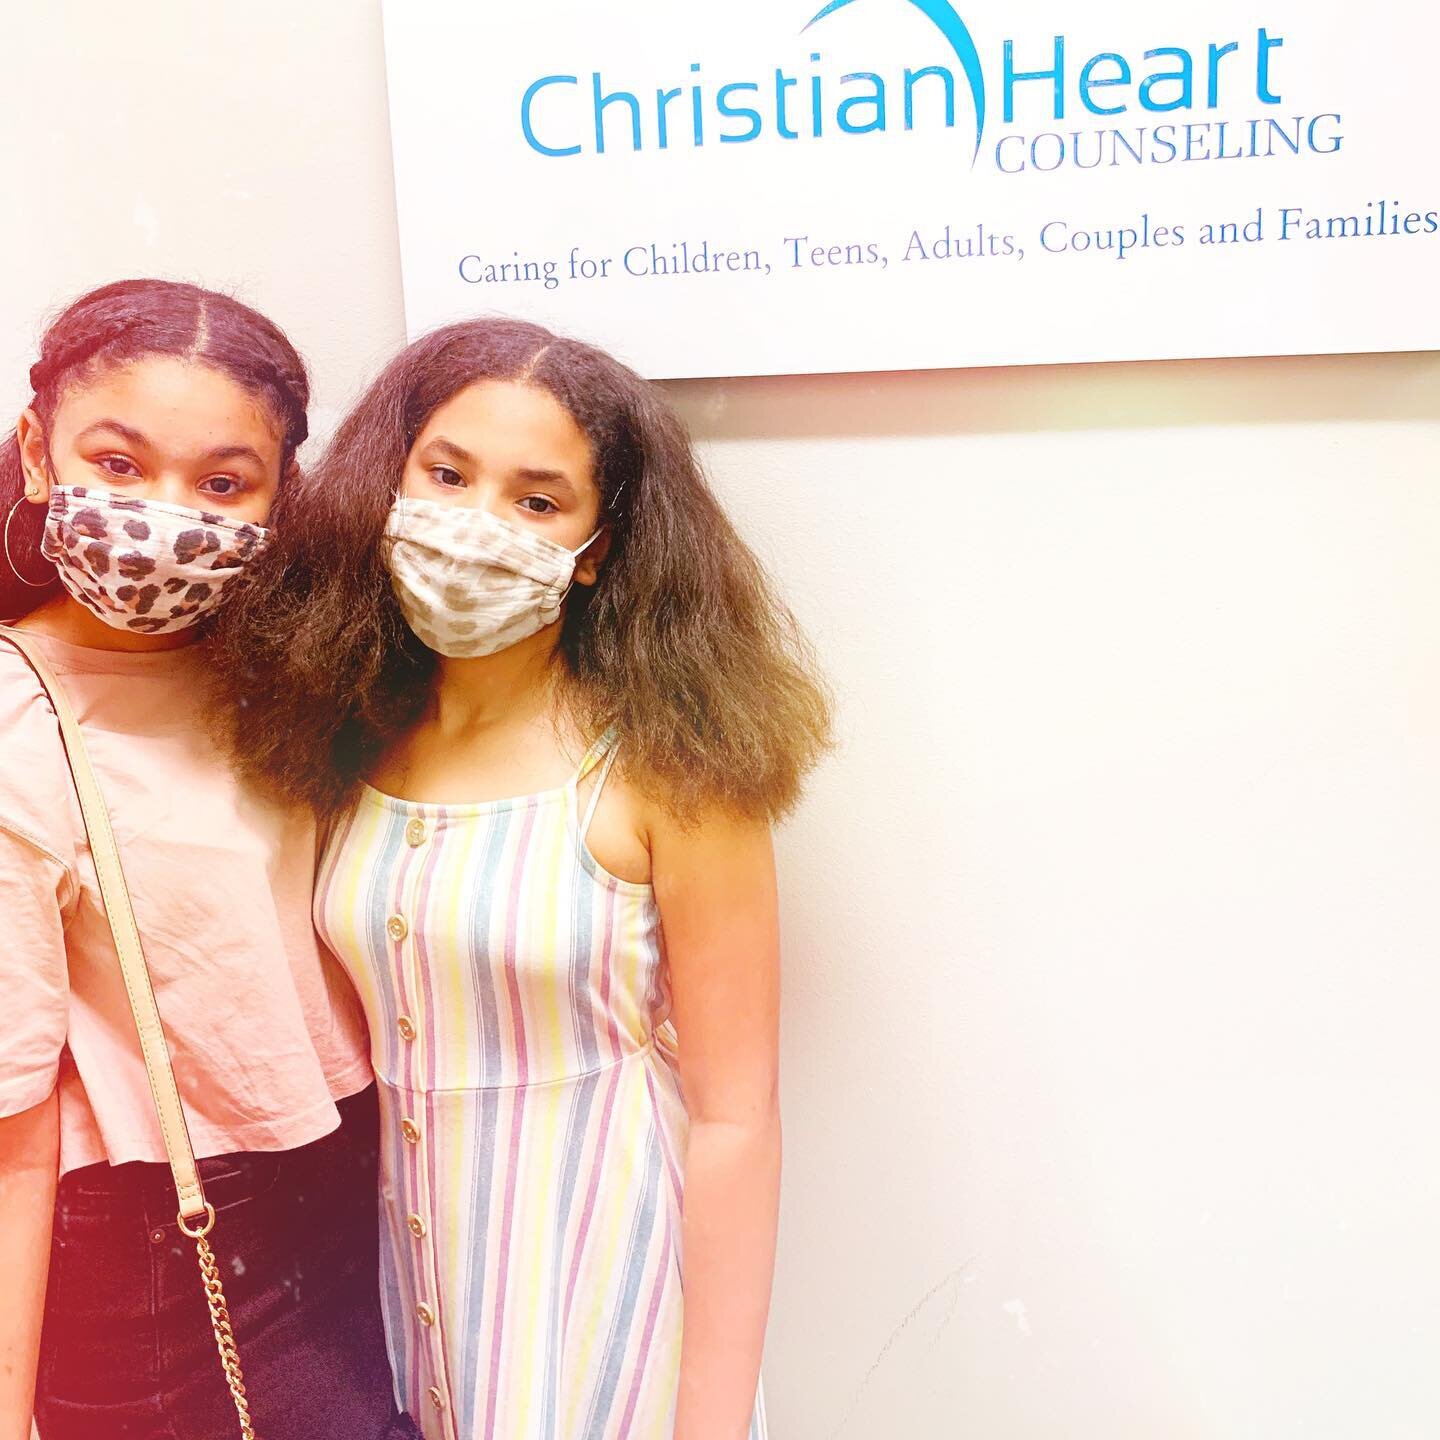 NORMALIZE THERAPY FOR YOU CHILDREN
&bull;
growing up, i was told that therapy was for white people&mdash;as was expressing emotions, pain and heartache.
&bull;
we were taught to stuff our emotions and &ldquo;talk to Jesus about them&rdquo; because on